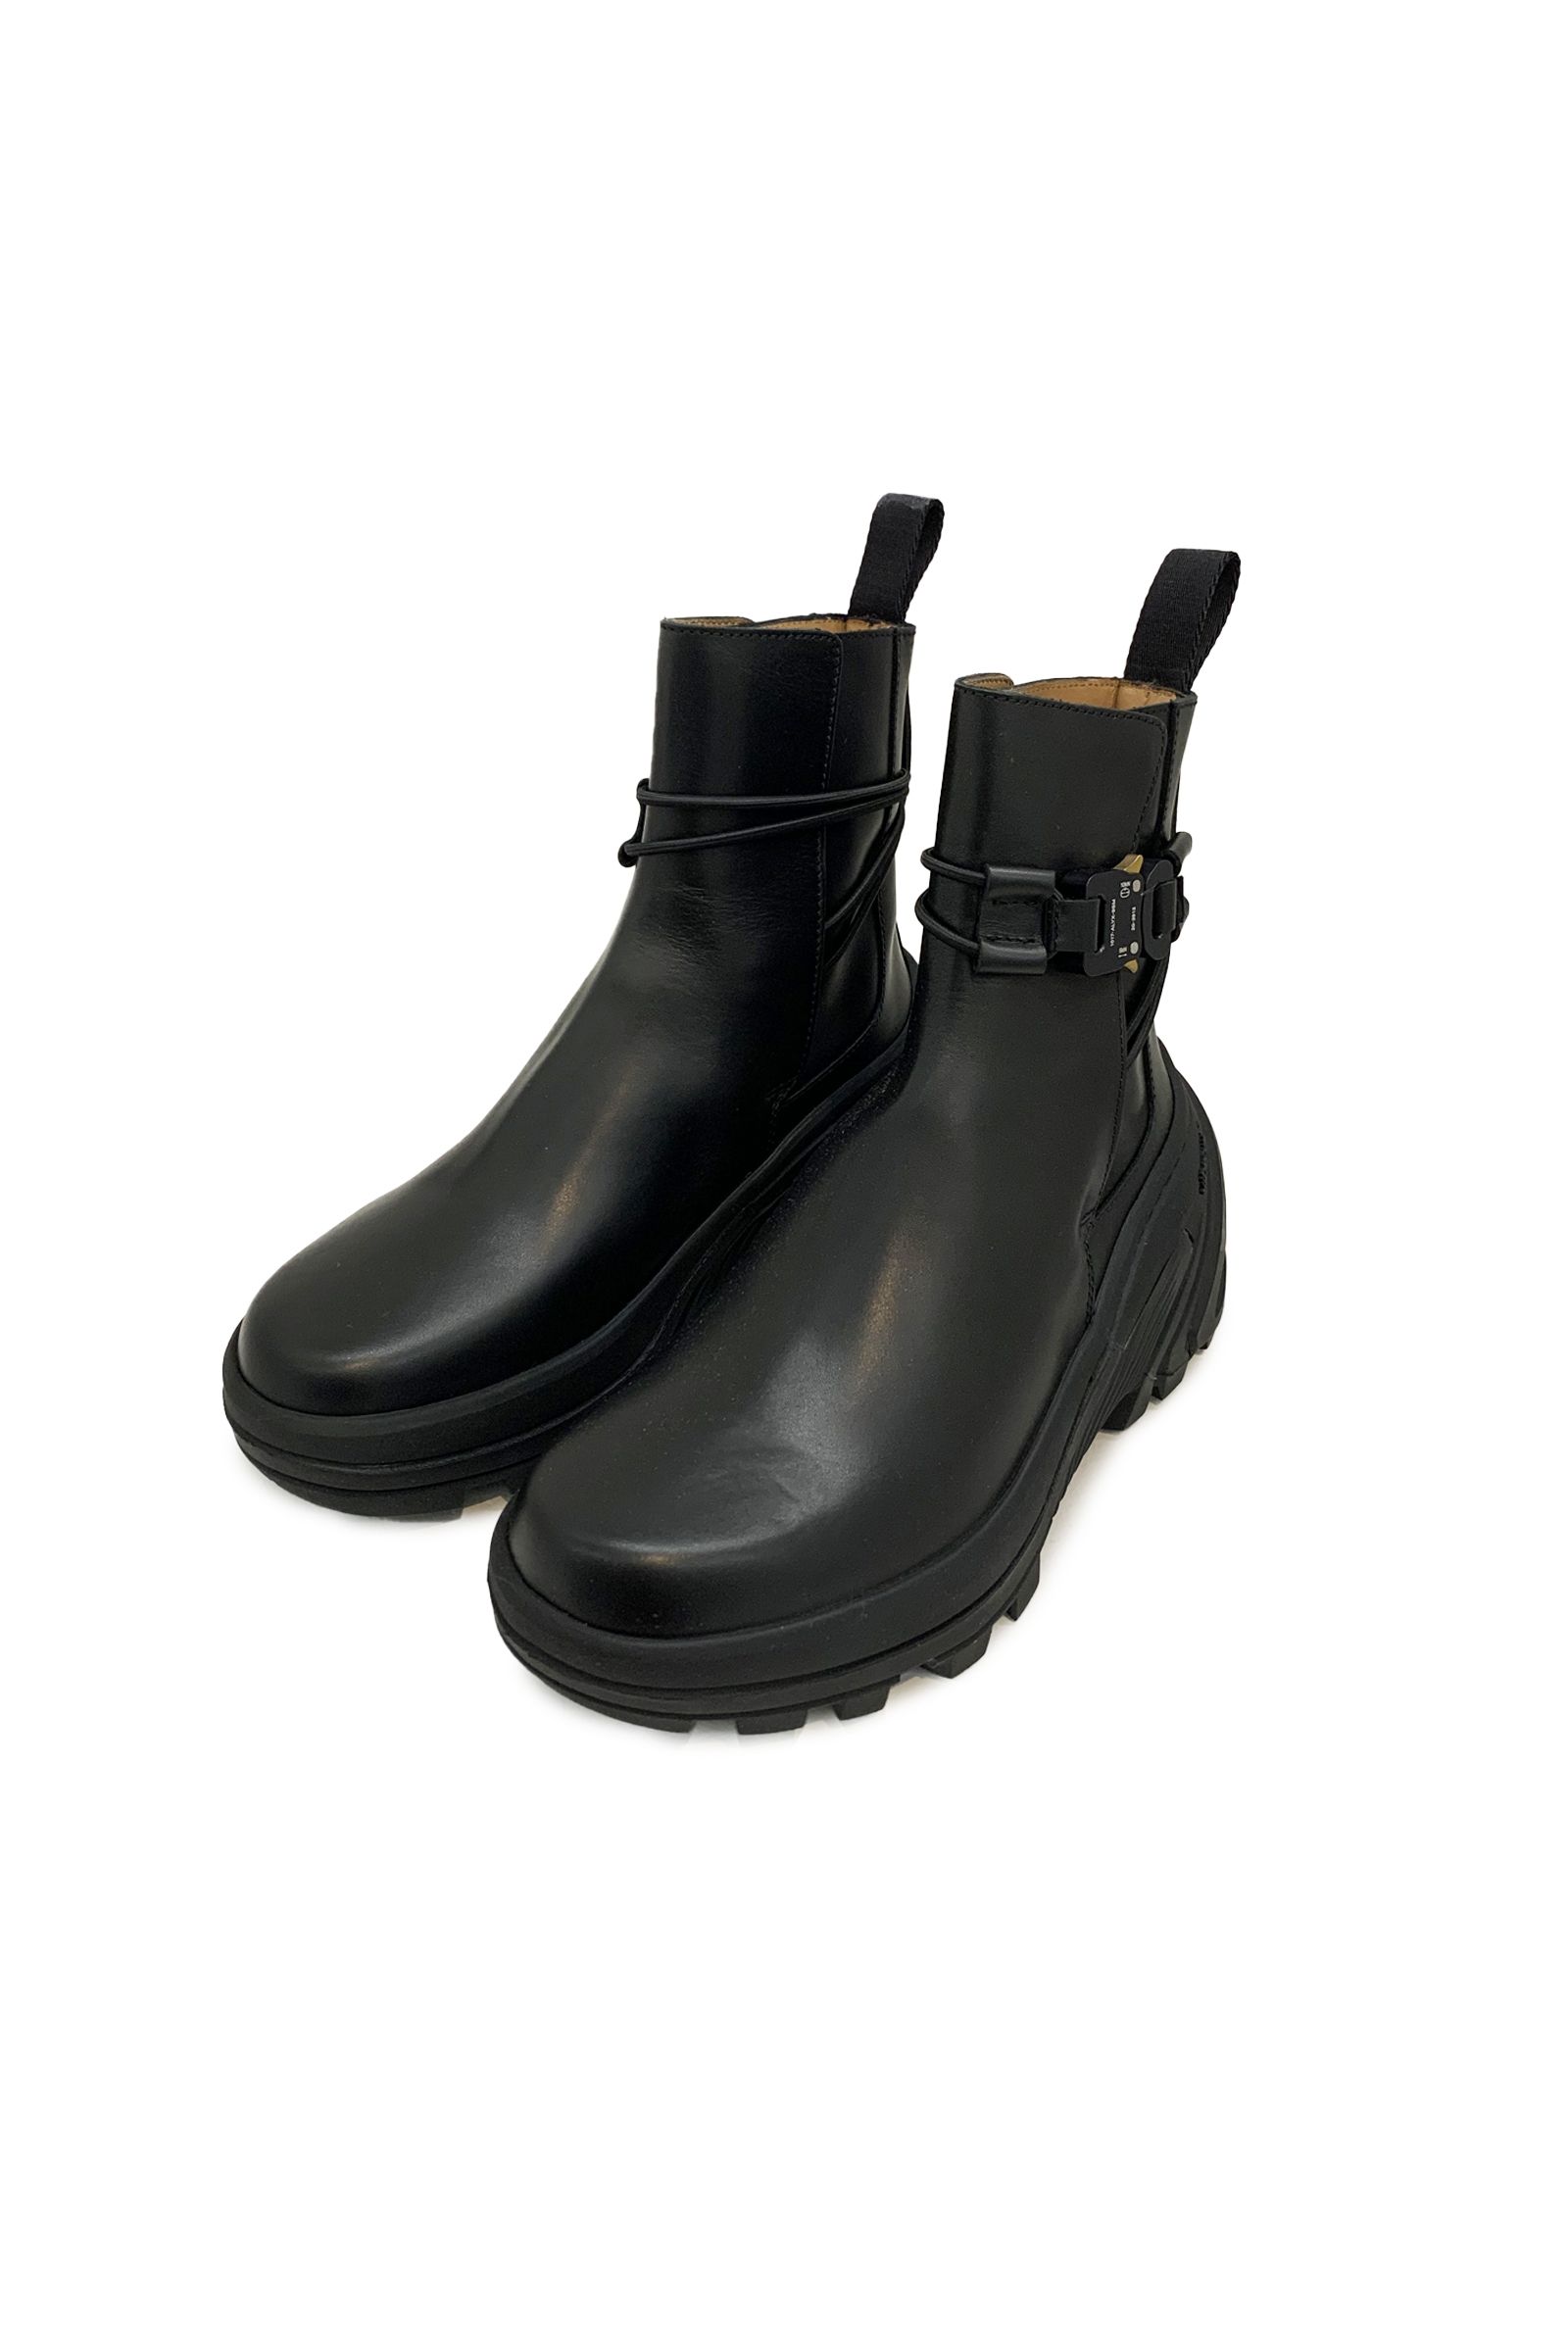 Low Buckle Boot With Fixed Sole - EU37(23~23.5cm)